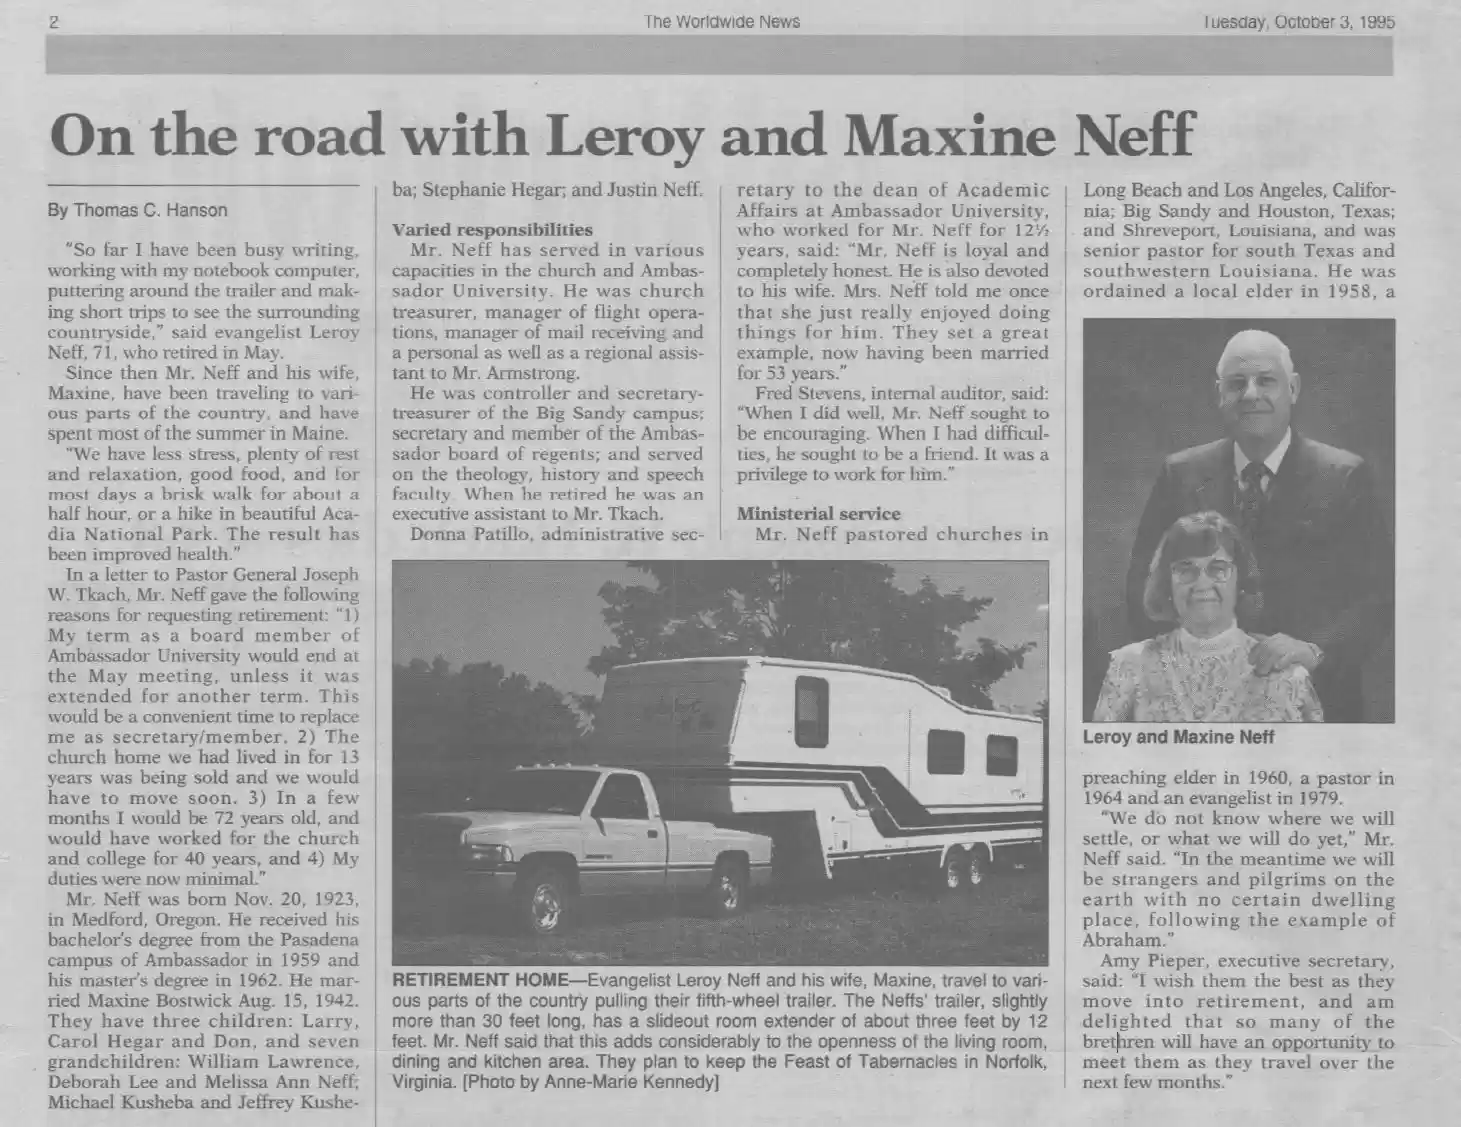 On the road with Leroy and Maxin Neff, WN, 3Oct1995